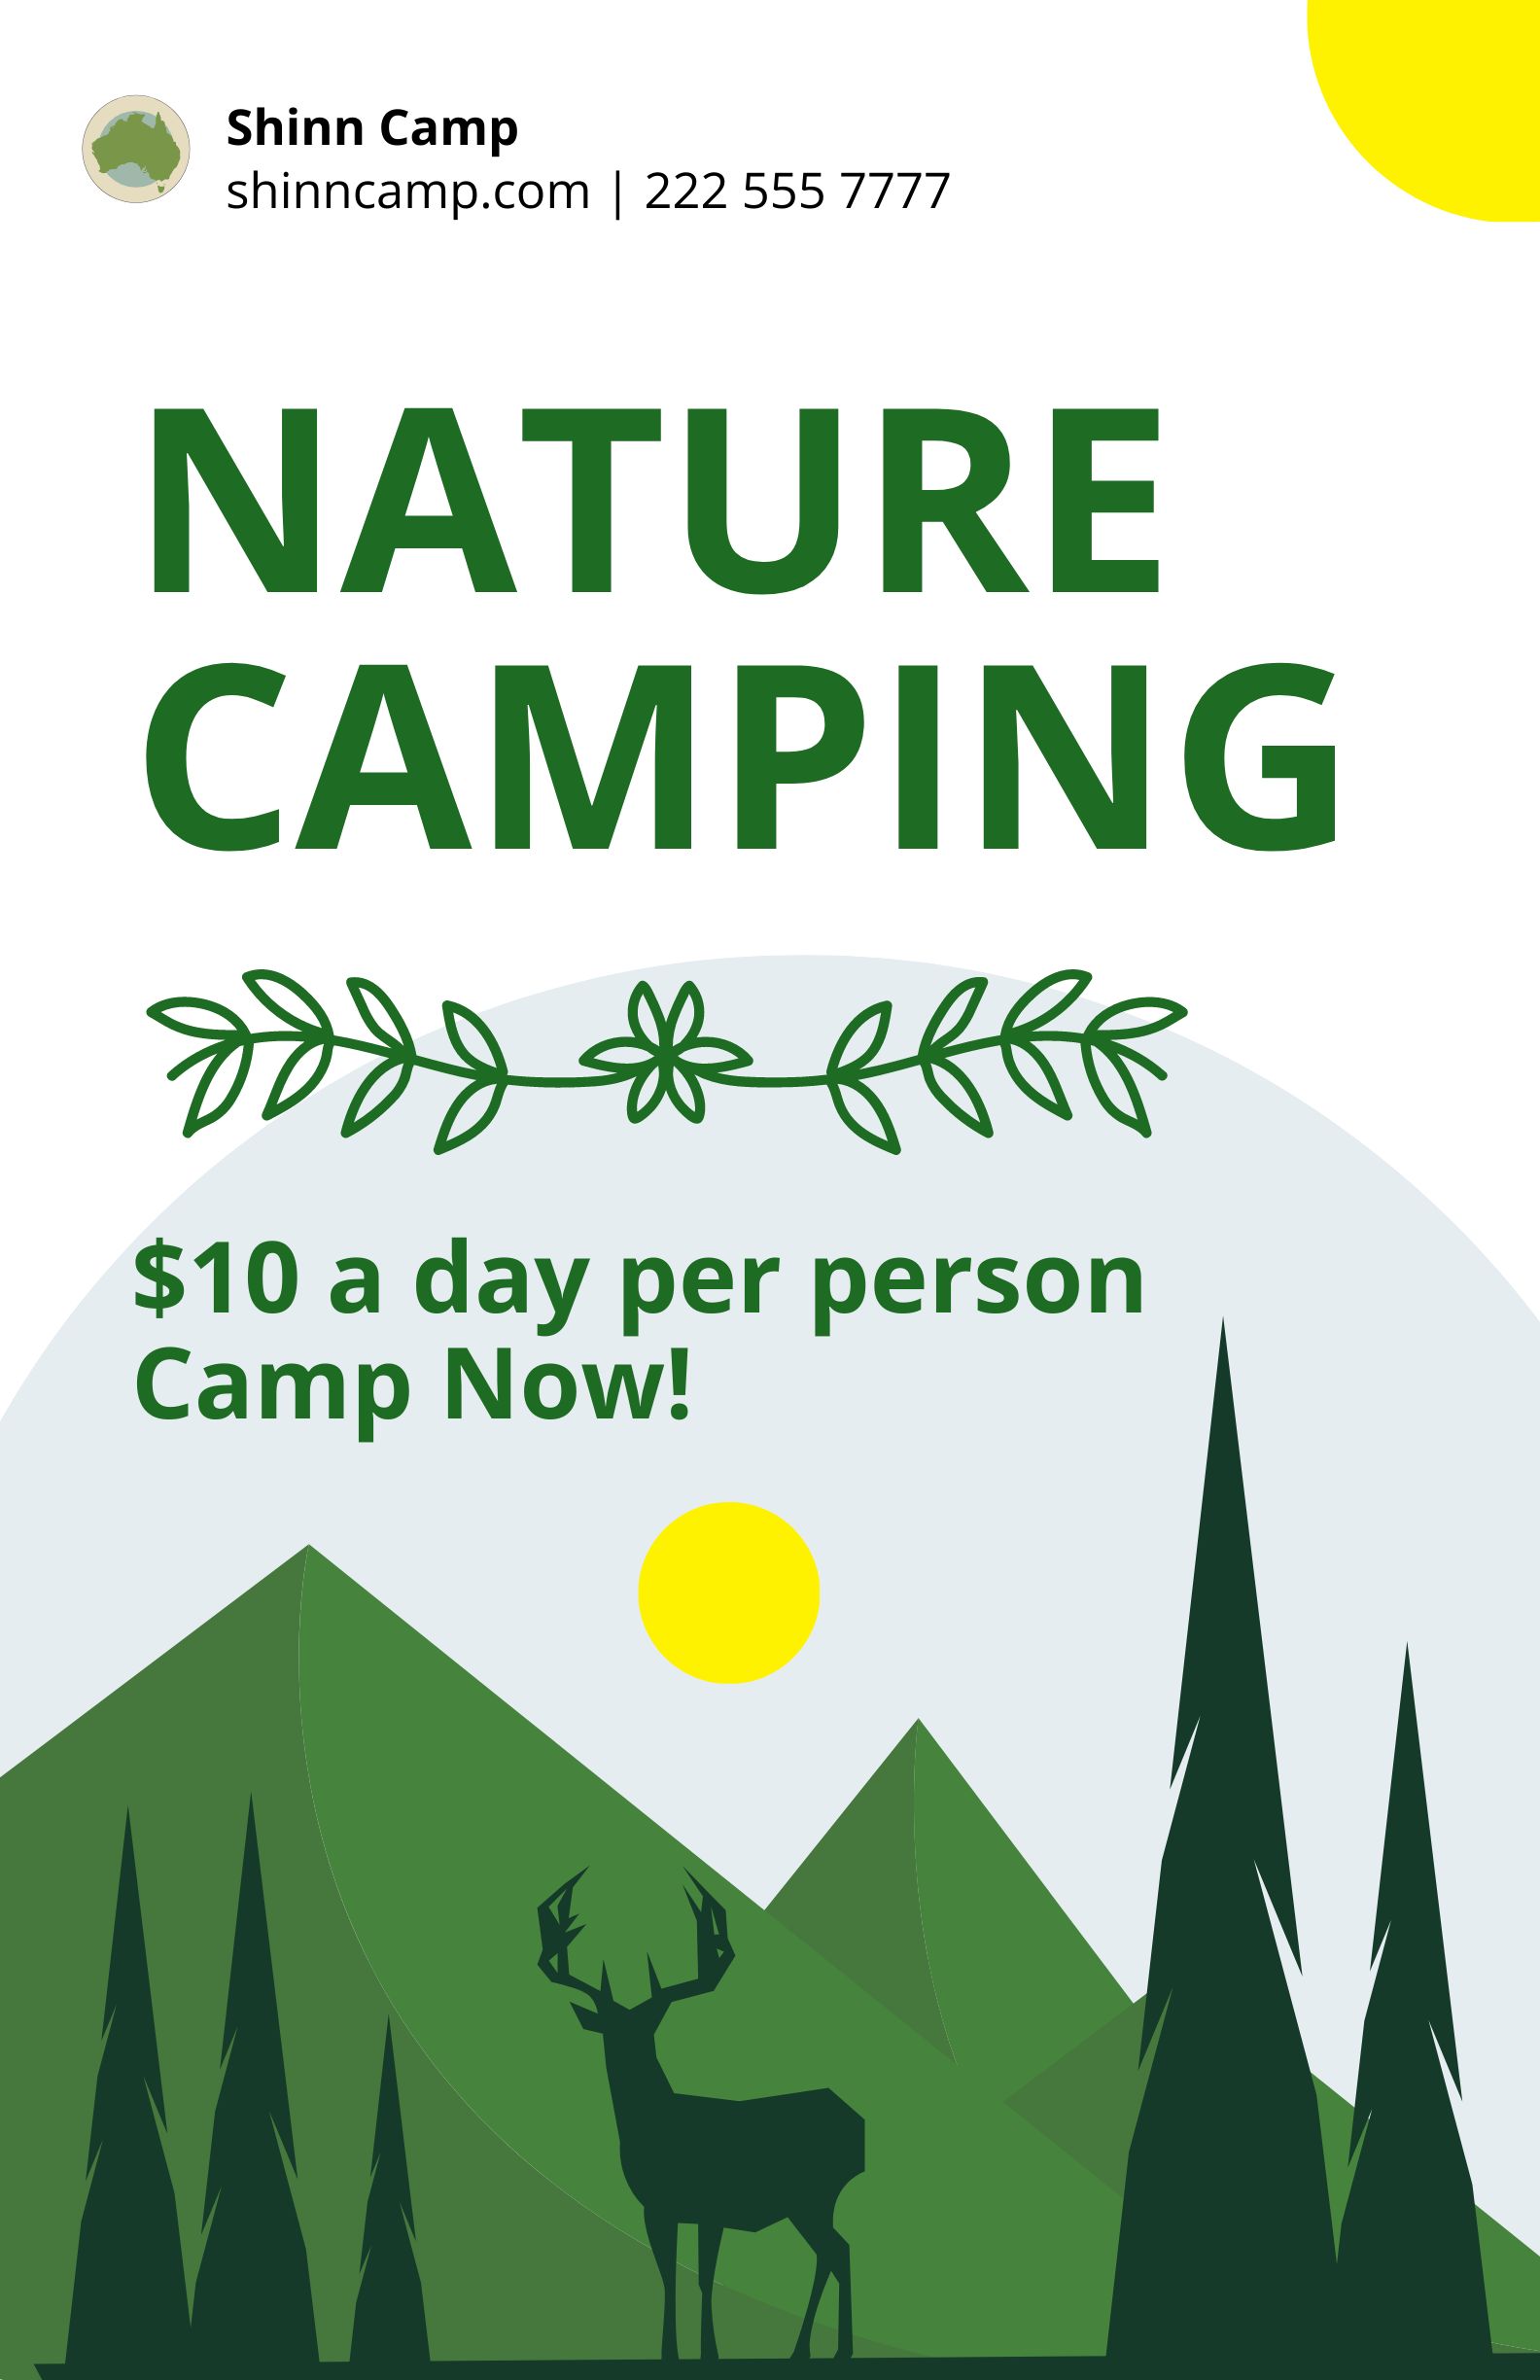 Free Nature Camping Poster Template Download in Word, Google Docs, Illustrator, PSD, Apple